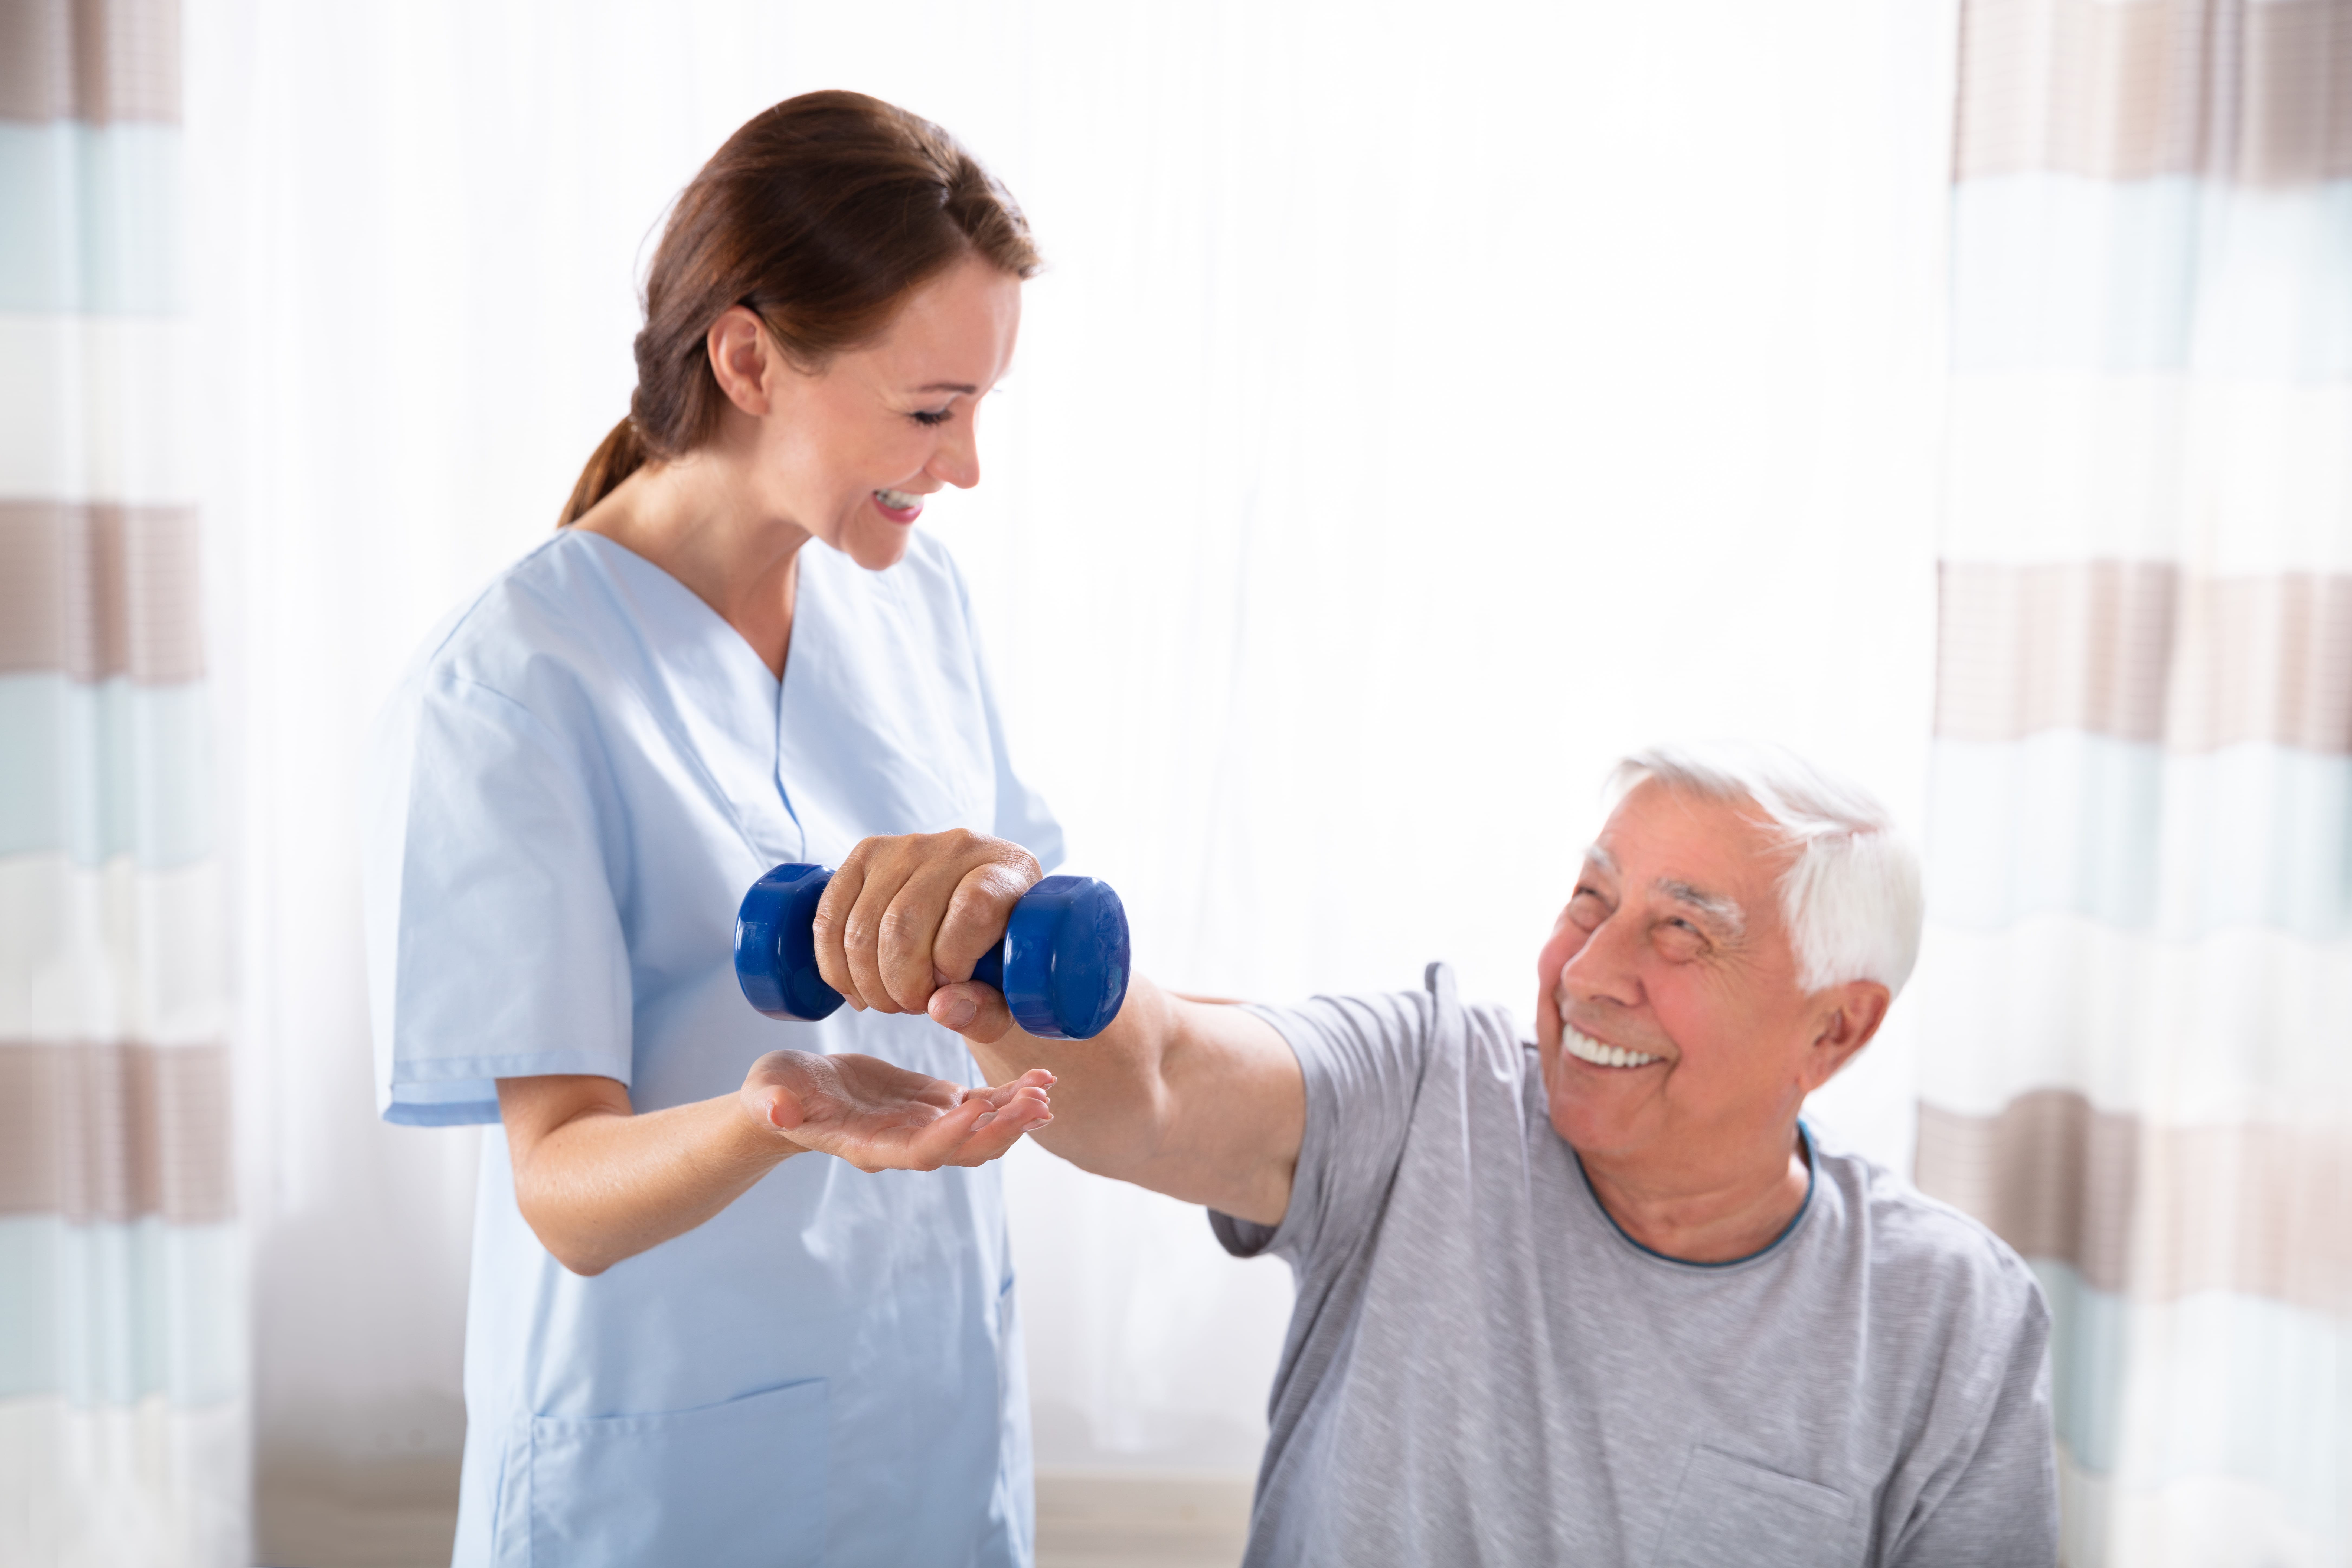 Best Physical Therapy Assistant Programs Latest Update